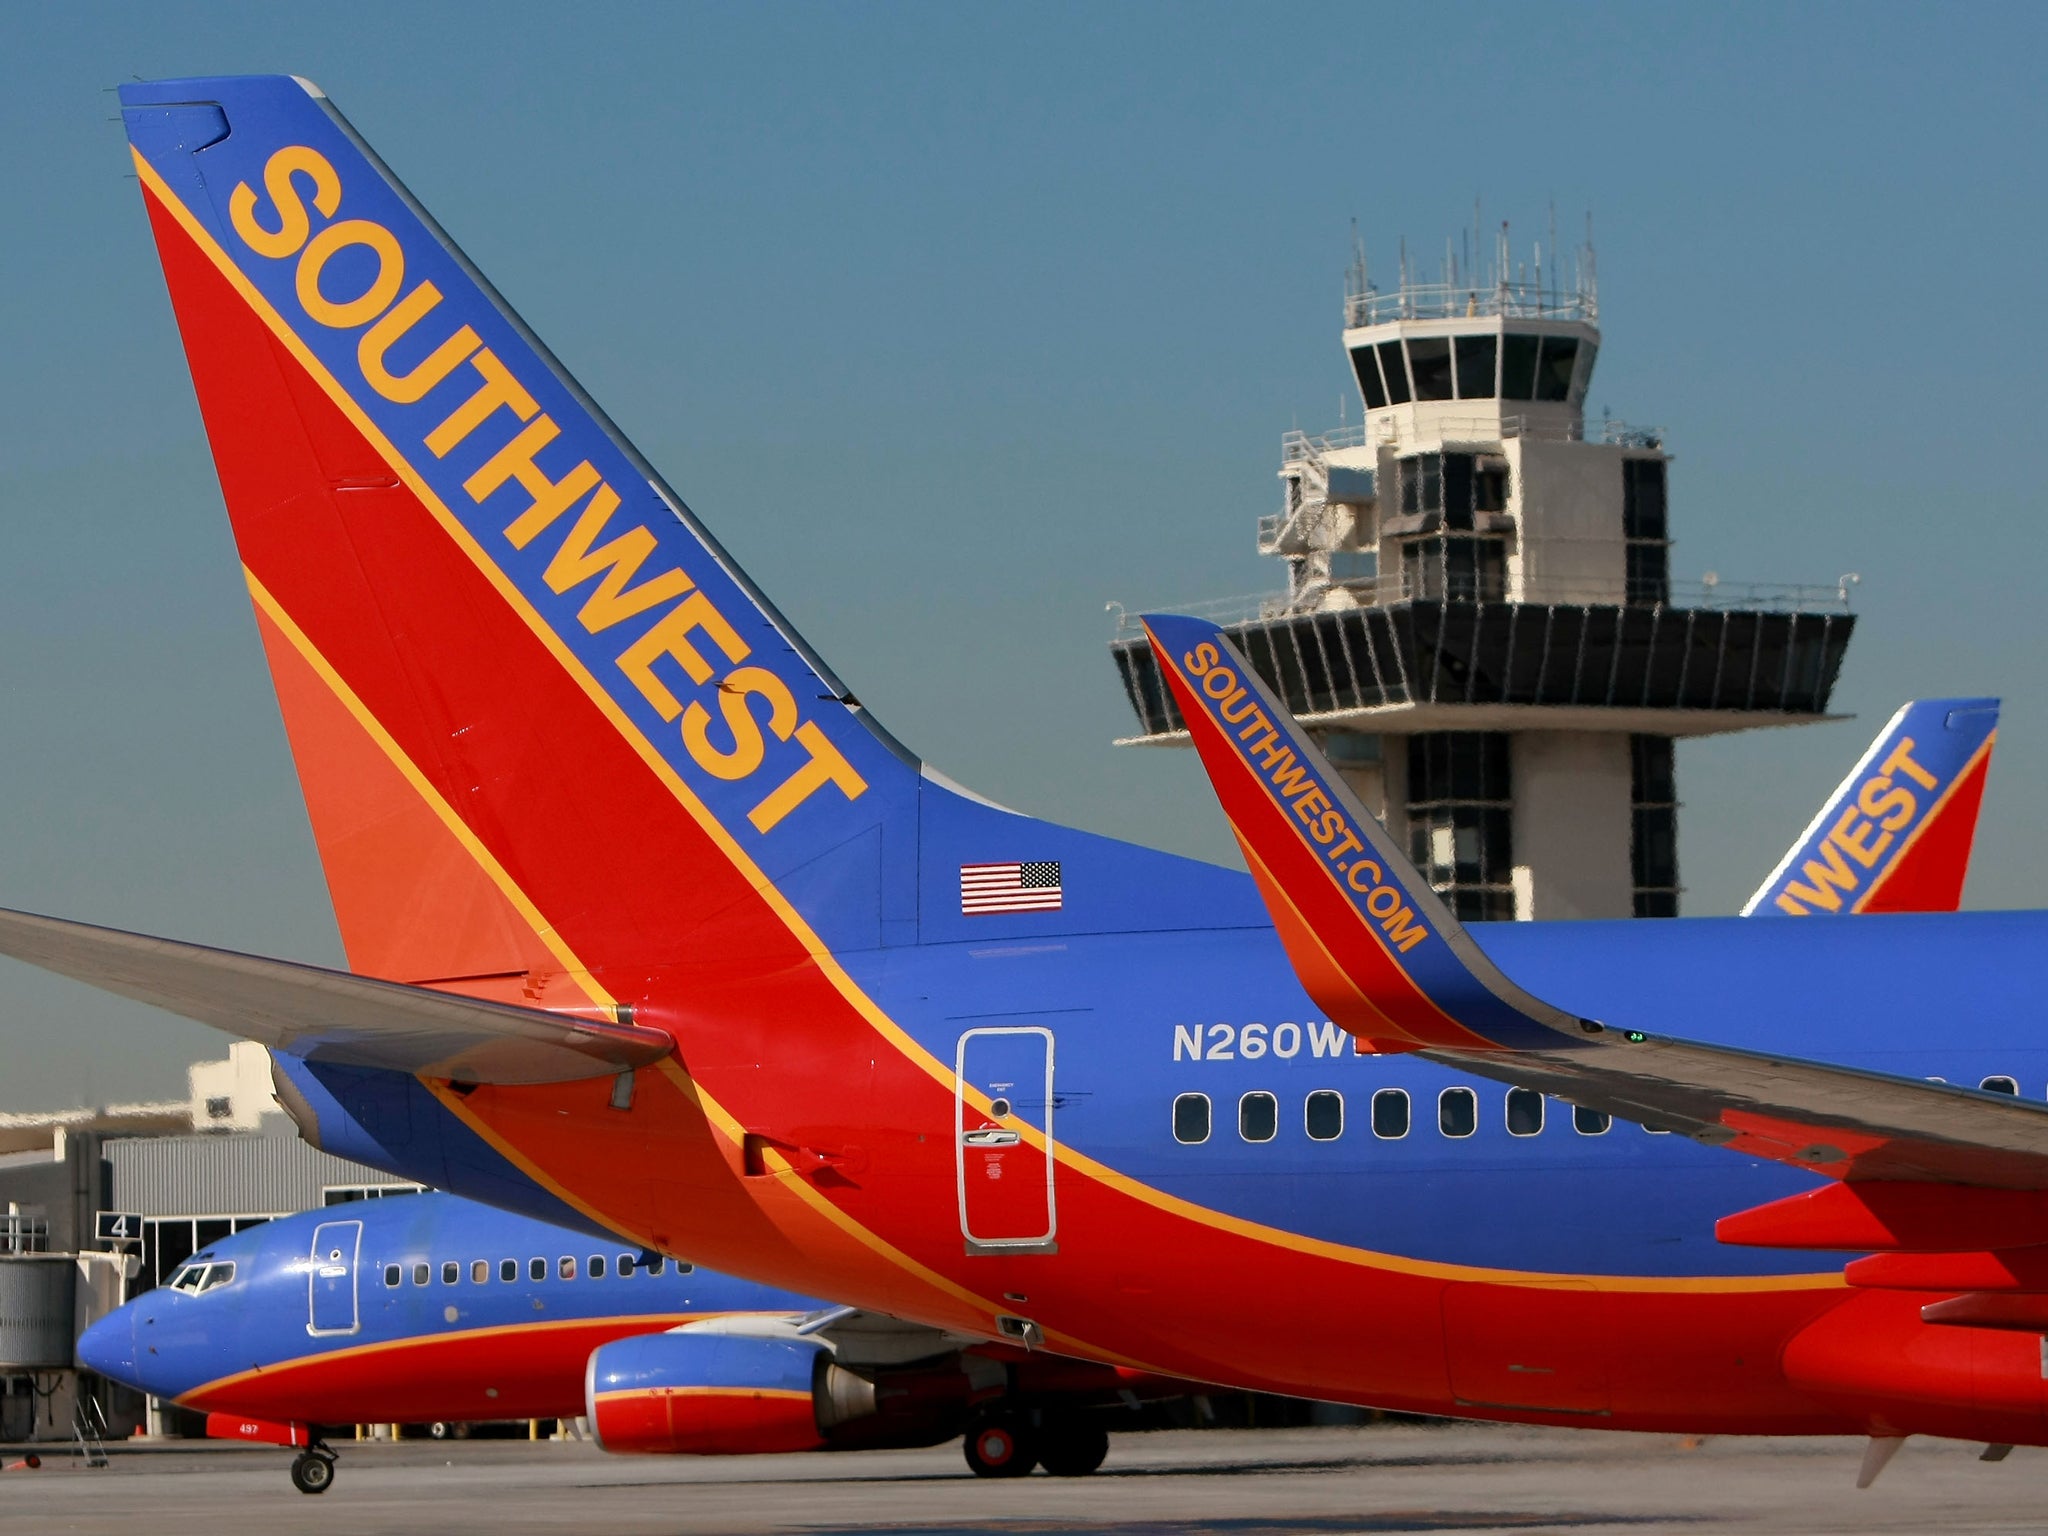 This is the second such incident in April on a Southwest Airlines flight Justin Sullivan/Getty